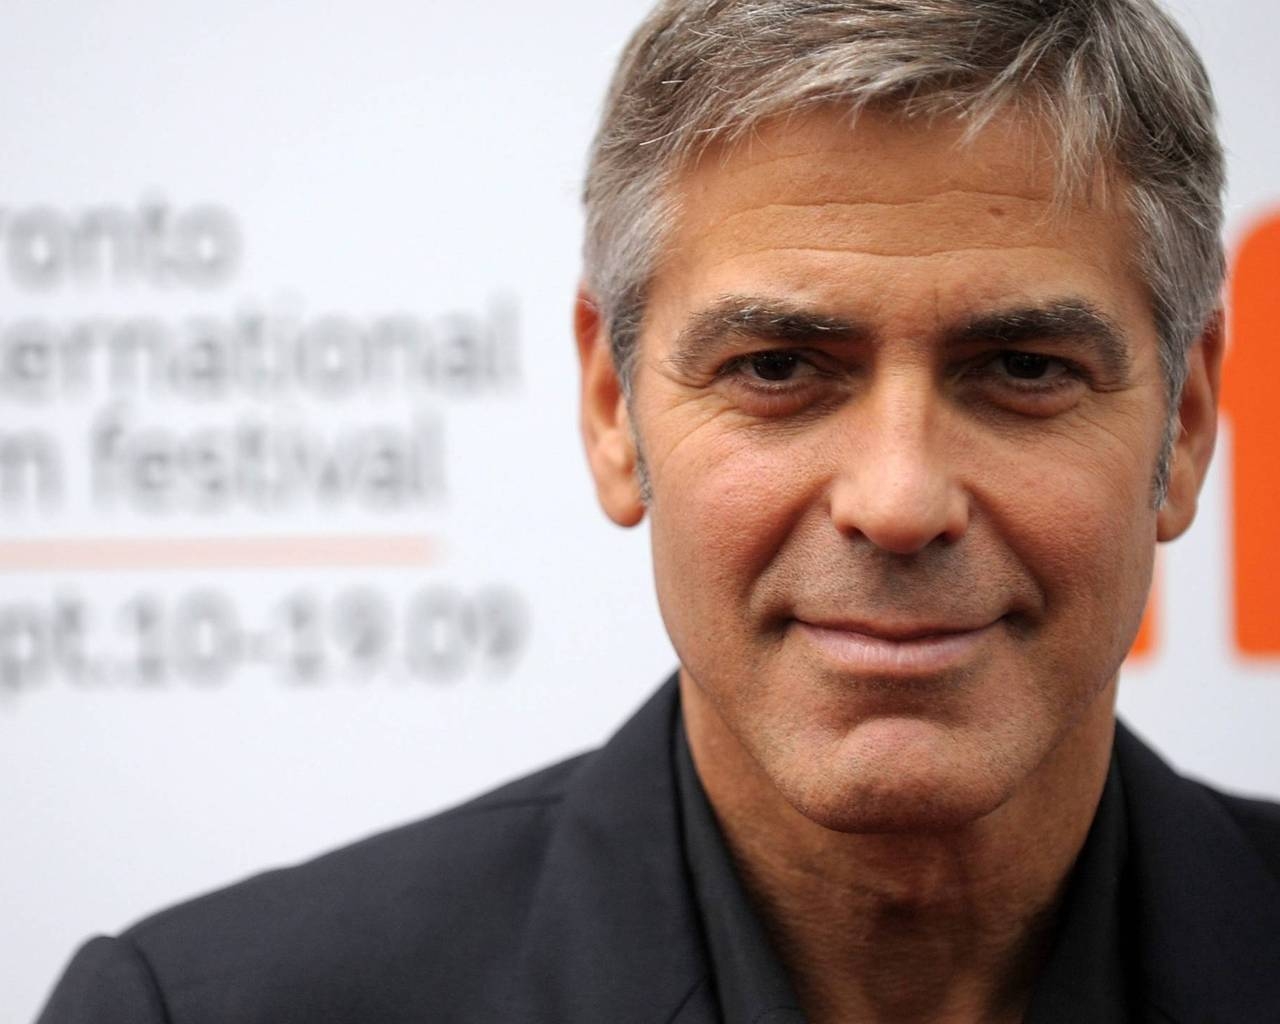 George Clooney Smile for 1280 x 1024 resolution